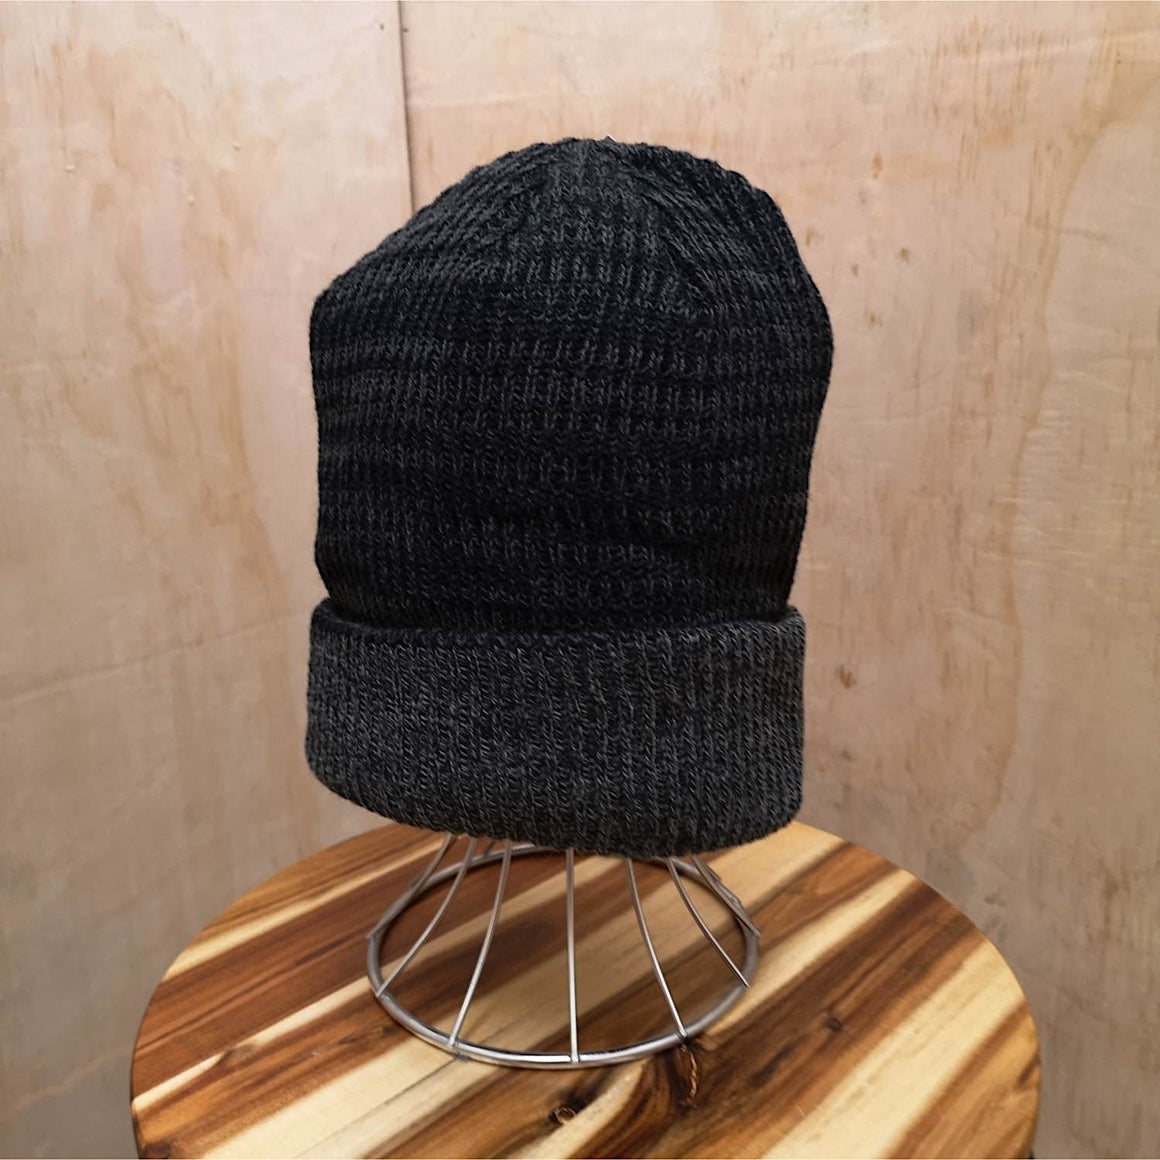 Avenel Rib Knit Beanie with Contrast Cuff Black/Charcoal